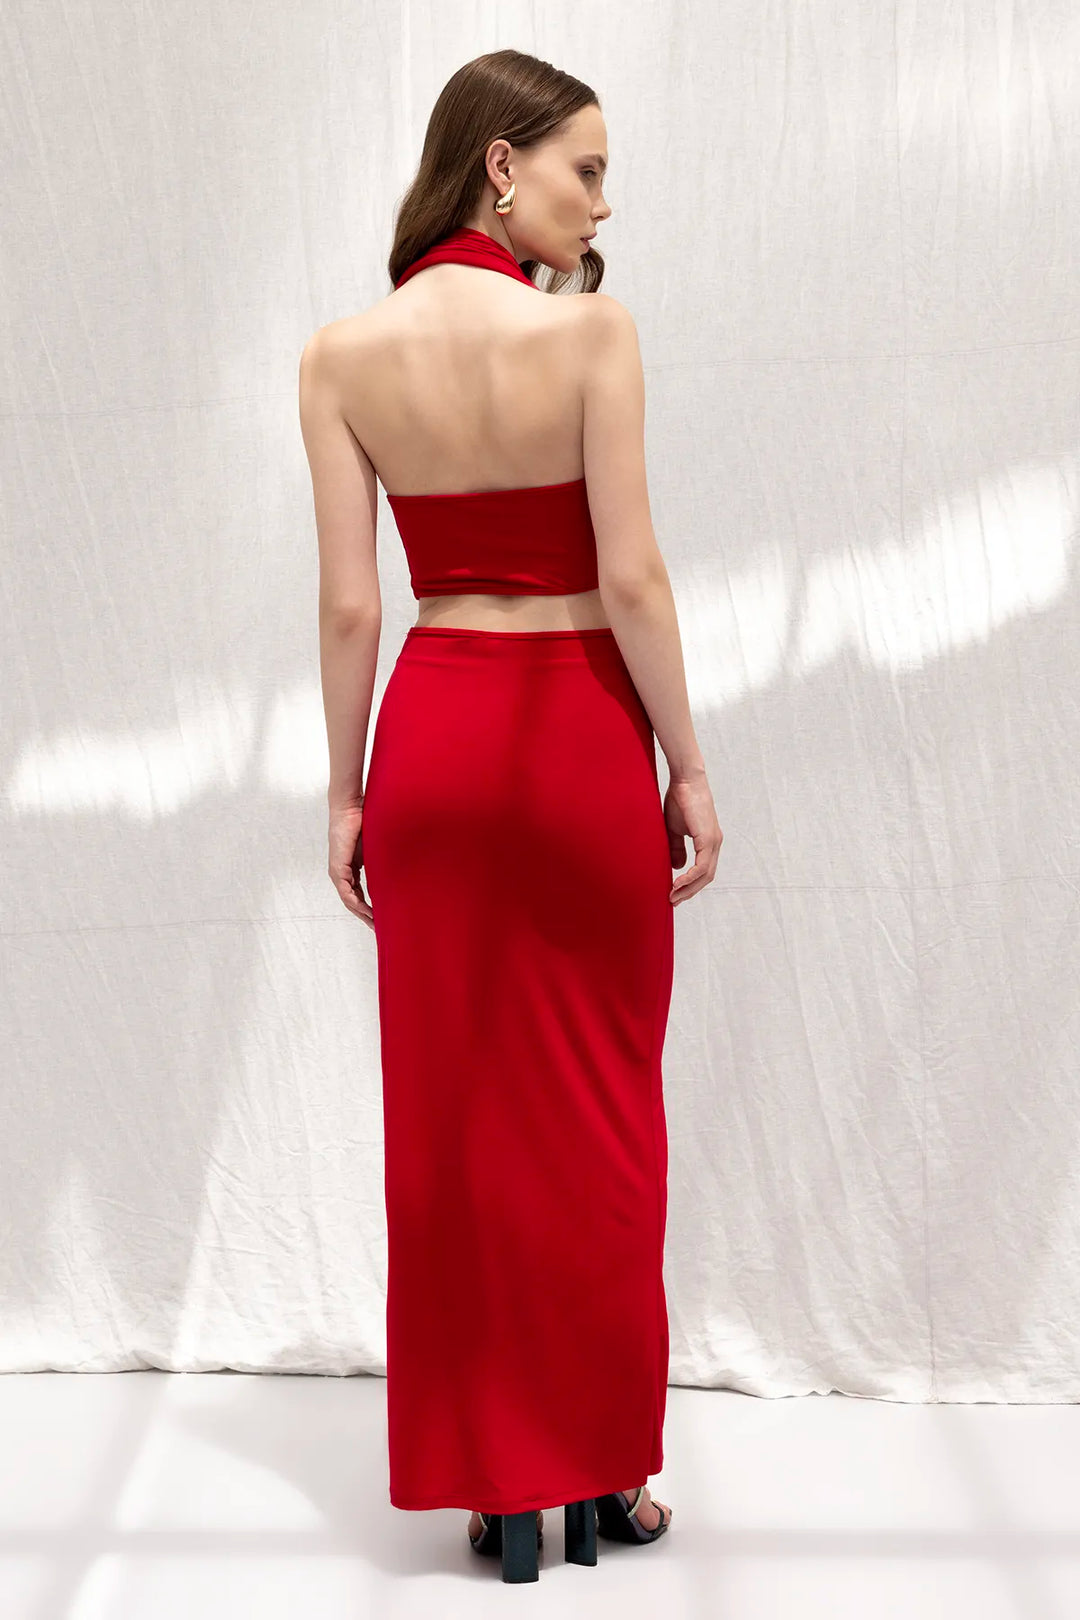 Scarlet Red Maxi Dress